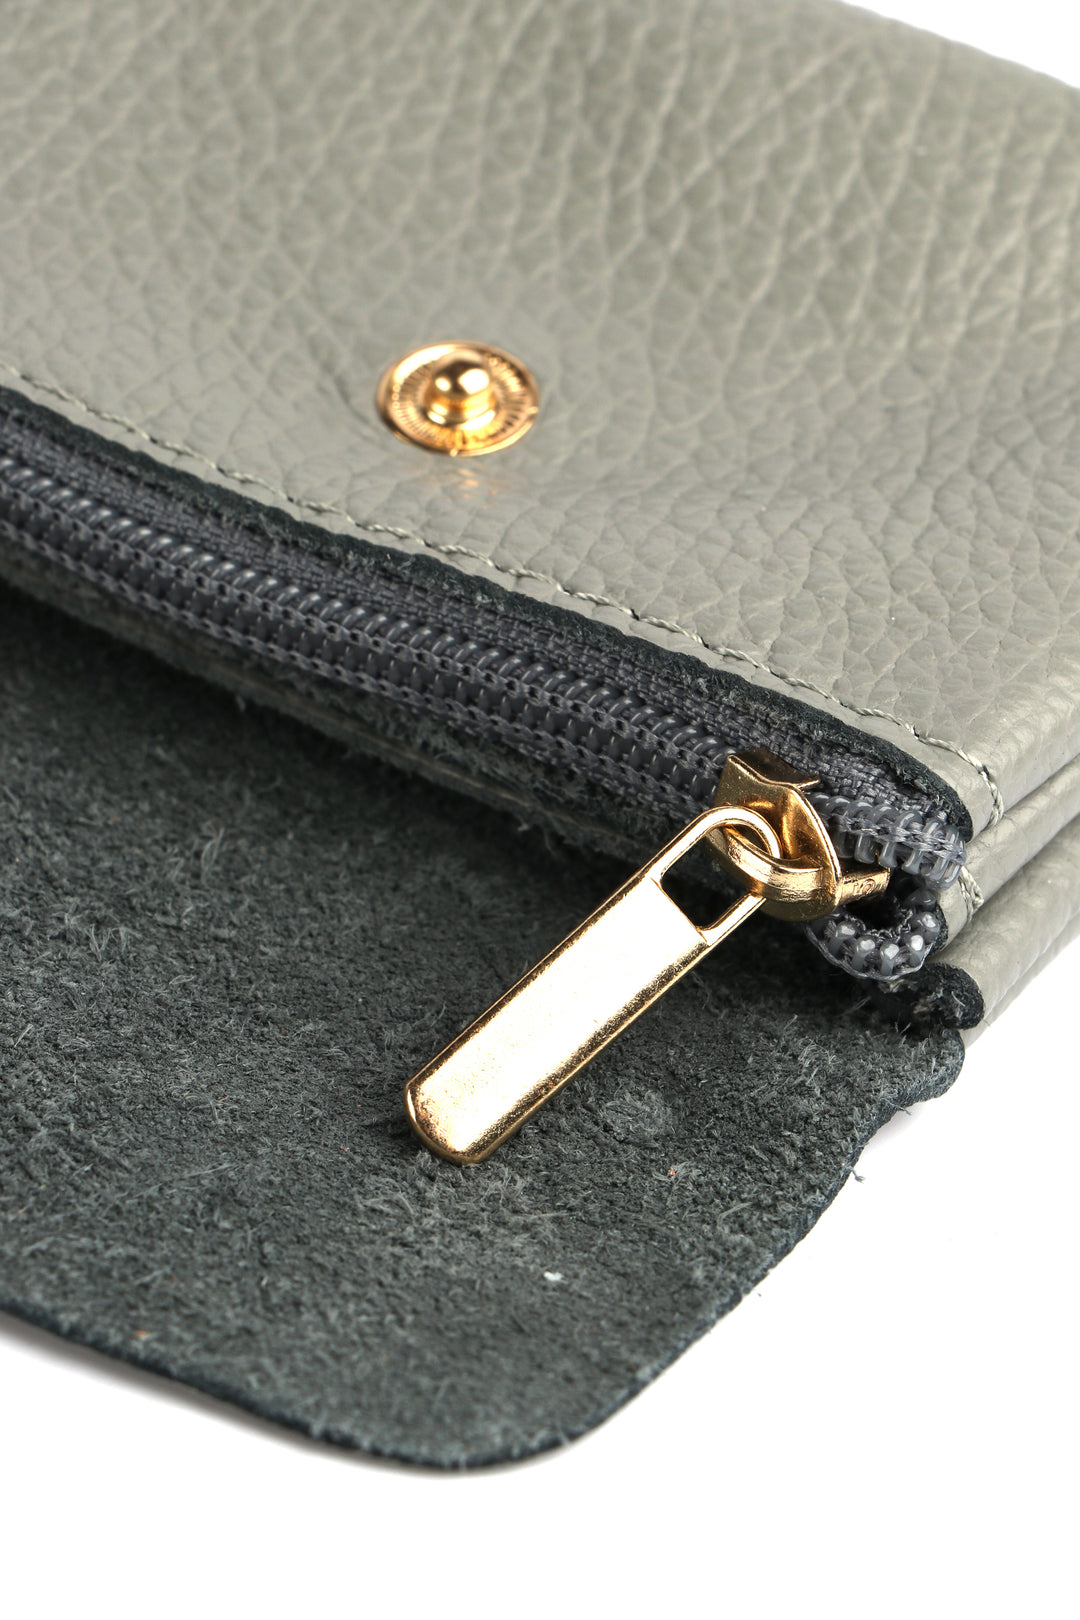 showing the zip closing internal compartment of the grey leather coin purse